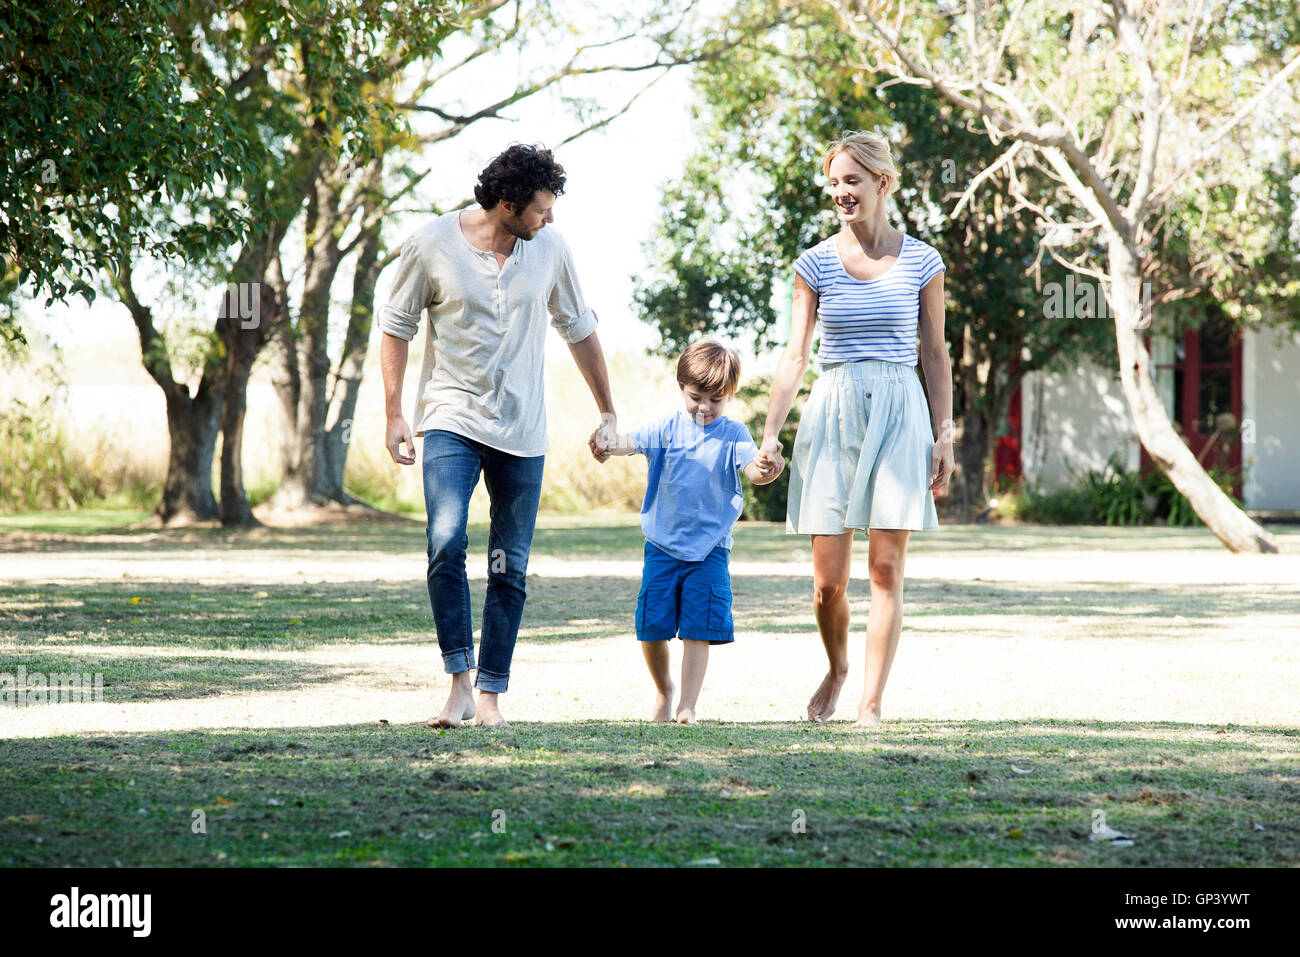 Family with one child taking walk outdoors together Stock Photo